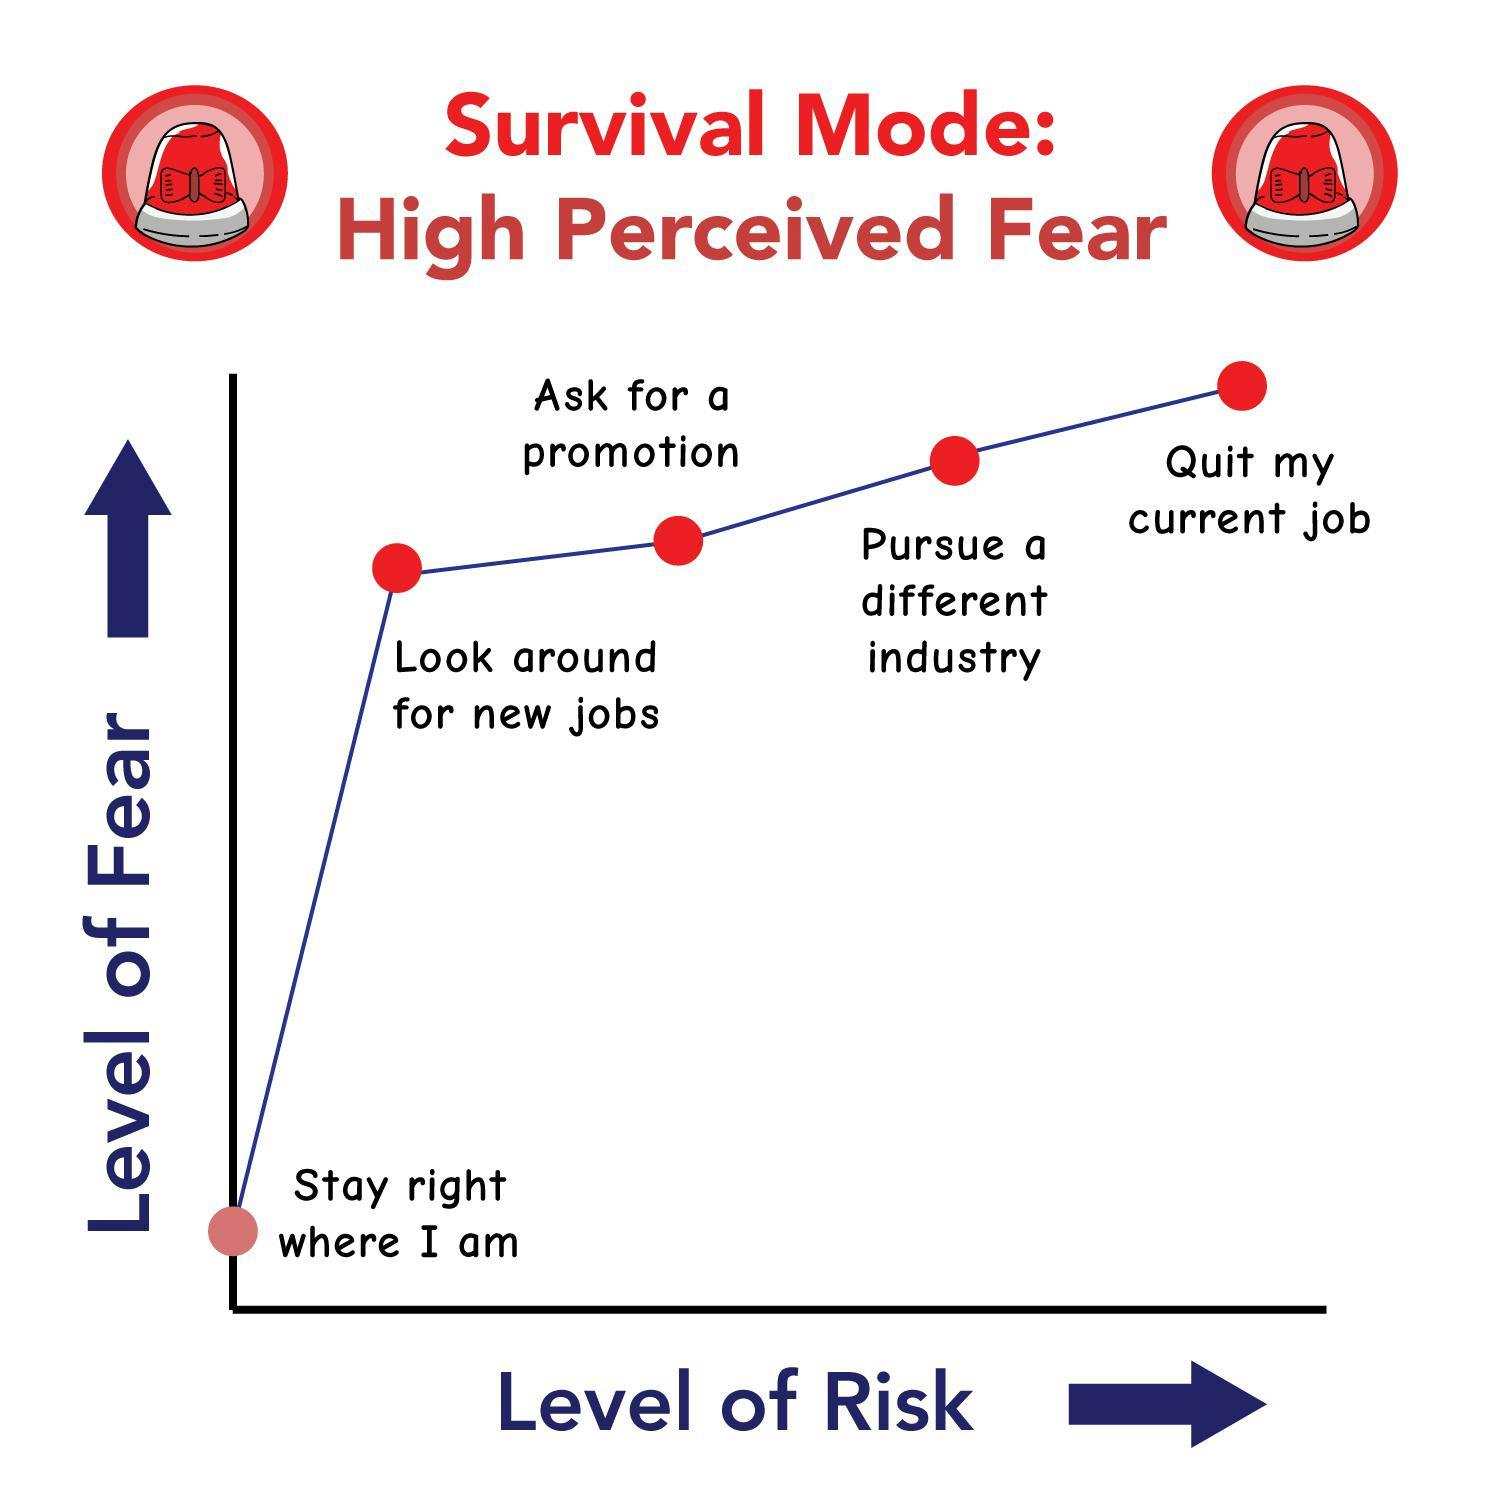 With this level of consistent fear, you won’t do anything outside of your comfort zone. You’ll never ask for that promotion in fear of getting fired, you’ll never invest money in the stock market in fear of losing it, and you’ll never pursue something purposeful in fear of being penniless.The most meaningful things in life come with some level of risk, and if you’re in survival mode, you won’t take them. The stakes will always seem too high, even if the downside to that risk is capped.The key to shifting out of survival mode is to realize that you have enough. The word “enough” may evoke different feelings from different people, but I’m simply referring to the amount you require to have your basic necessities covered.Do you have enough money to have a roof over your head? If you quit your job, will you really end up homeless, or will you be fine? Is your anxiety about money largely unfounded, considering you have your basic needs covered?Survival mode is turned on when reality is clouded by the fog of fear. It turns a completely manageable situation into one that is overblown, and every small decision regarding money causes immense anxiety.